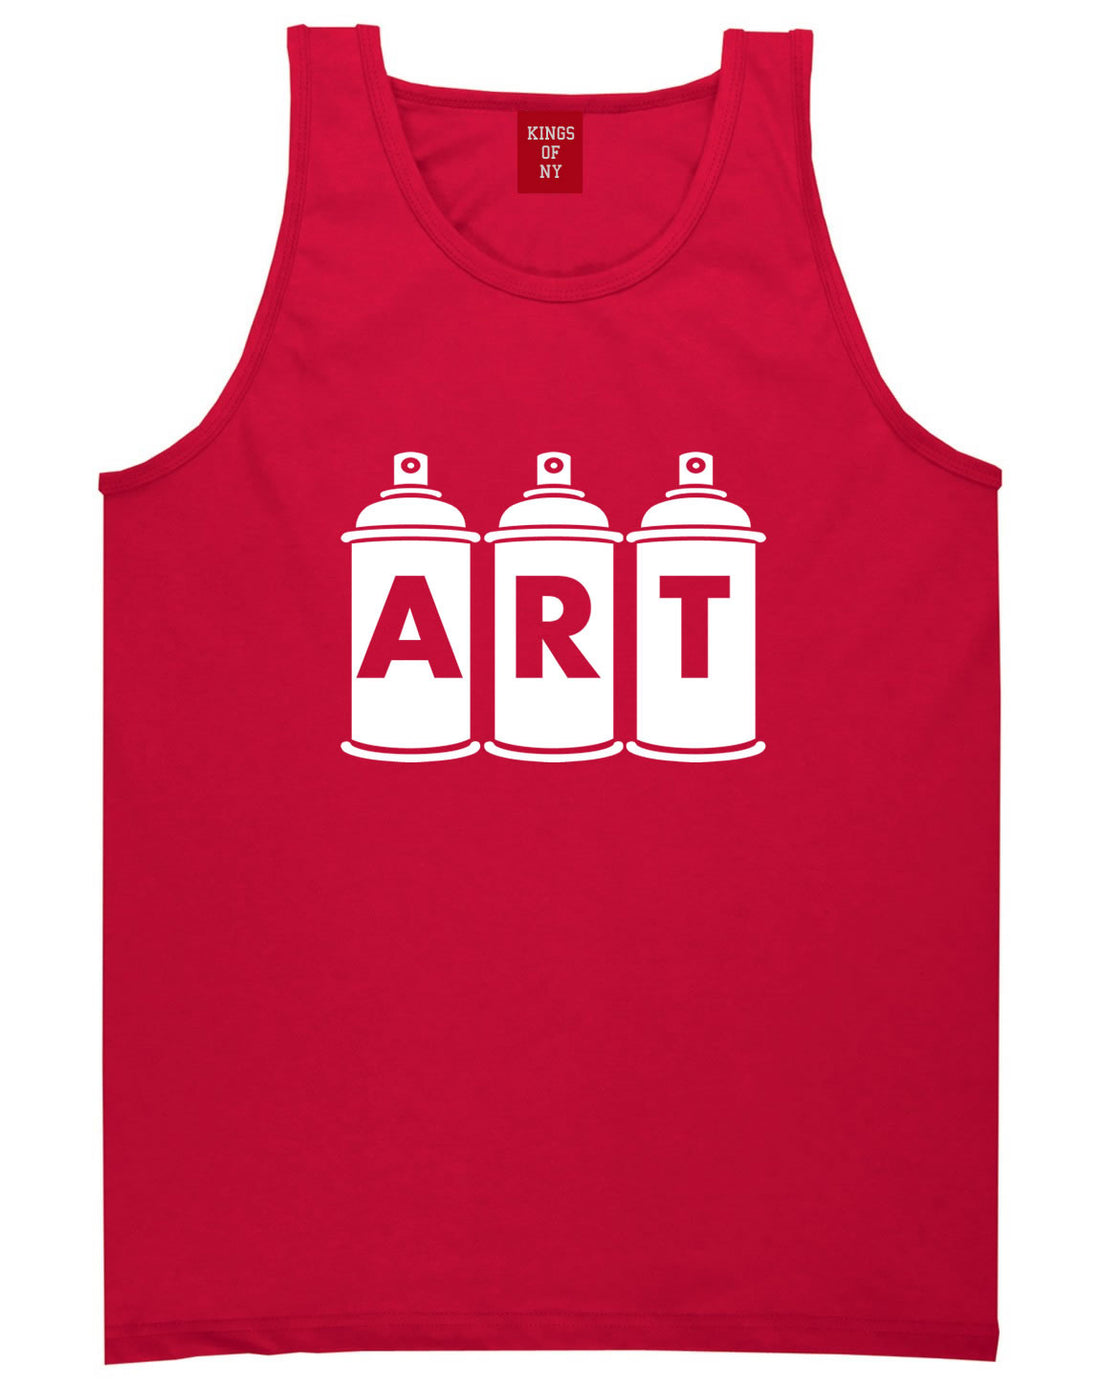 Art graf graffiti spray can paint artist Tank Top in Red By Kings Of NY